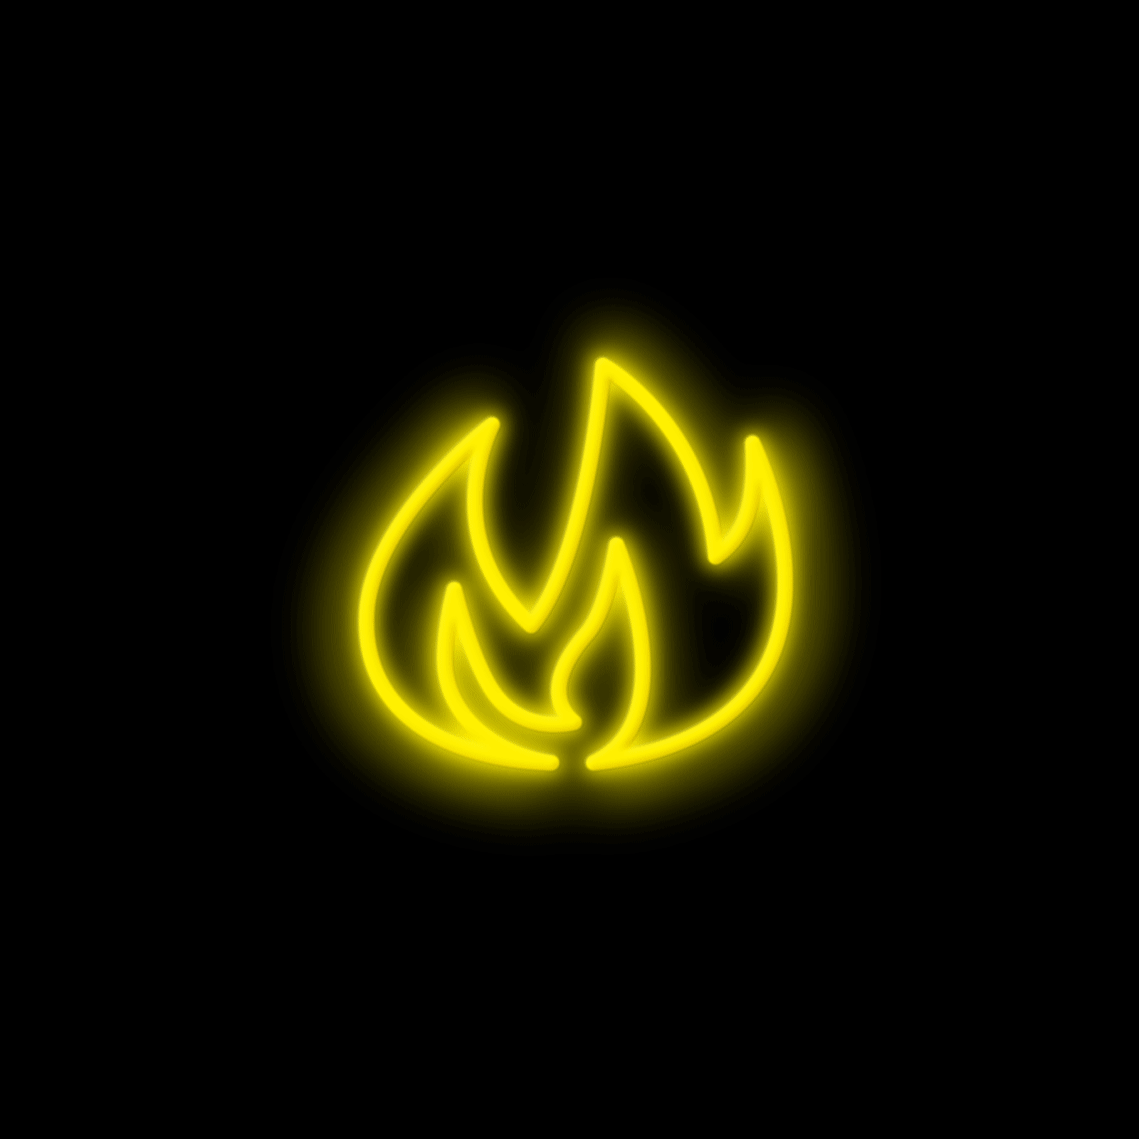 Animated neon design of three illustrated symbols of heart, eye, and fire, flashing in succession.
